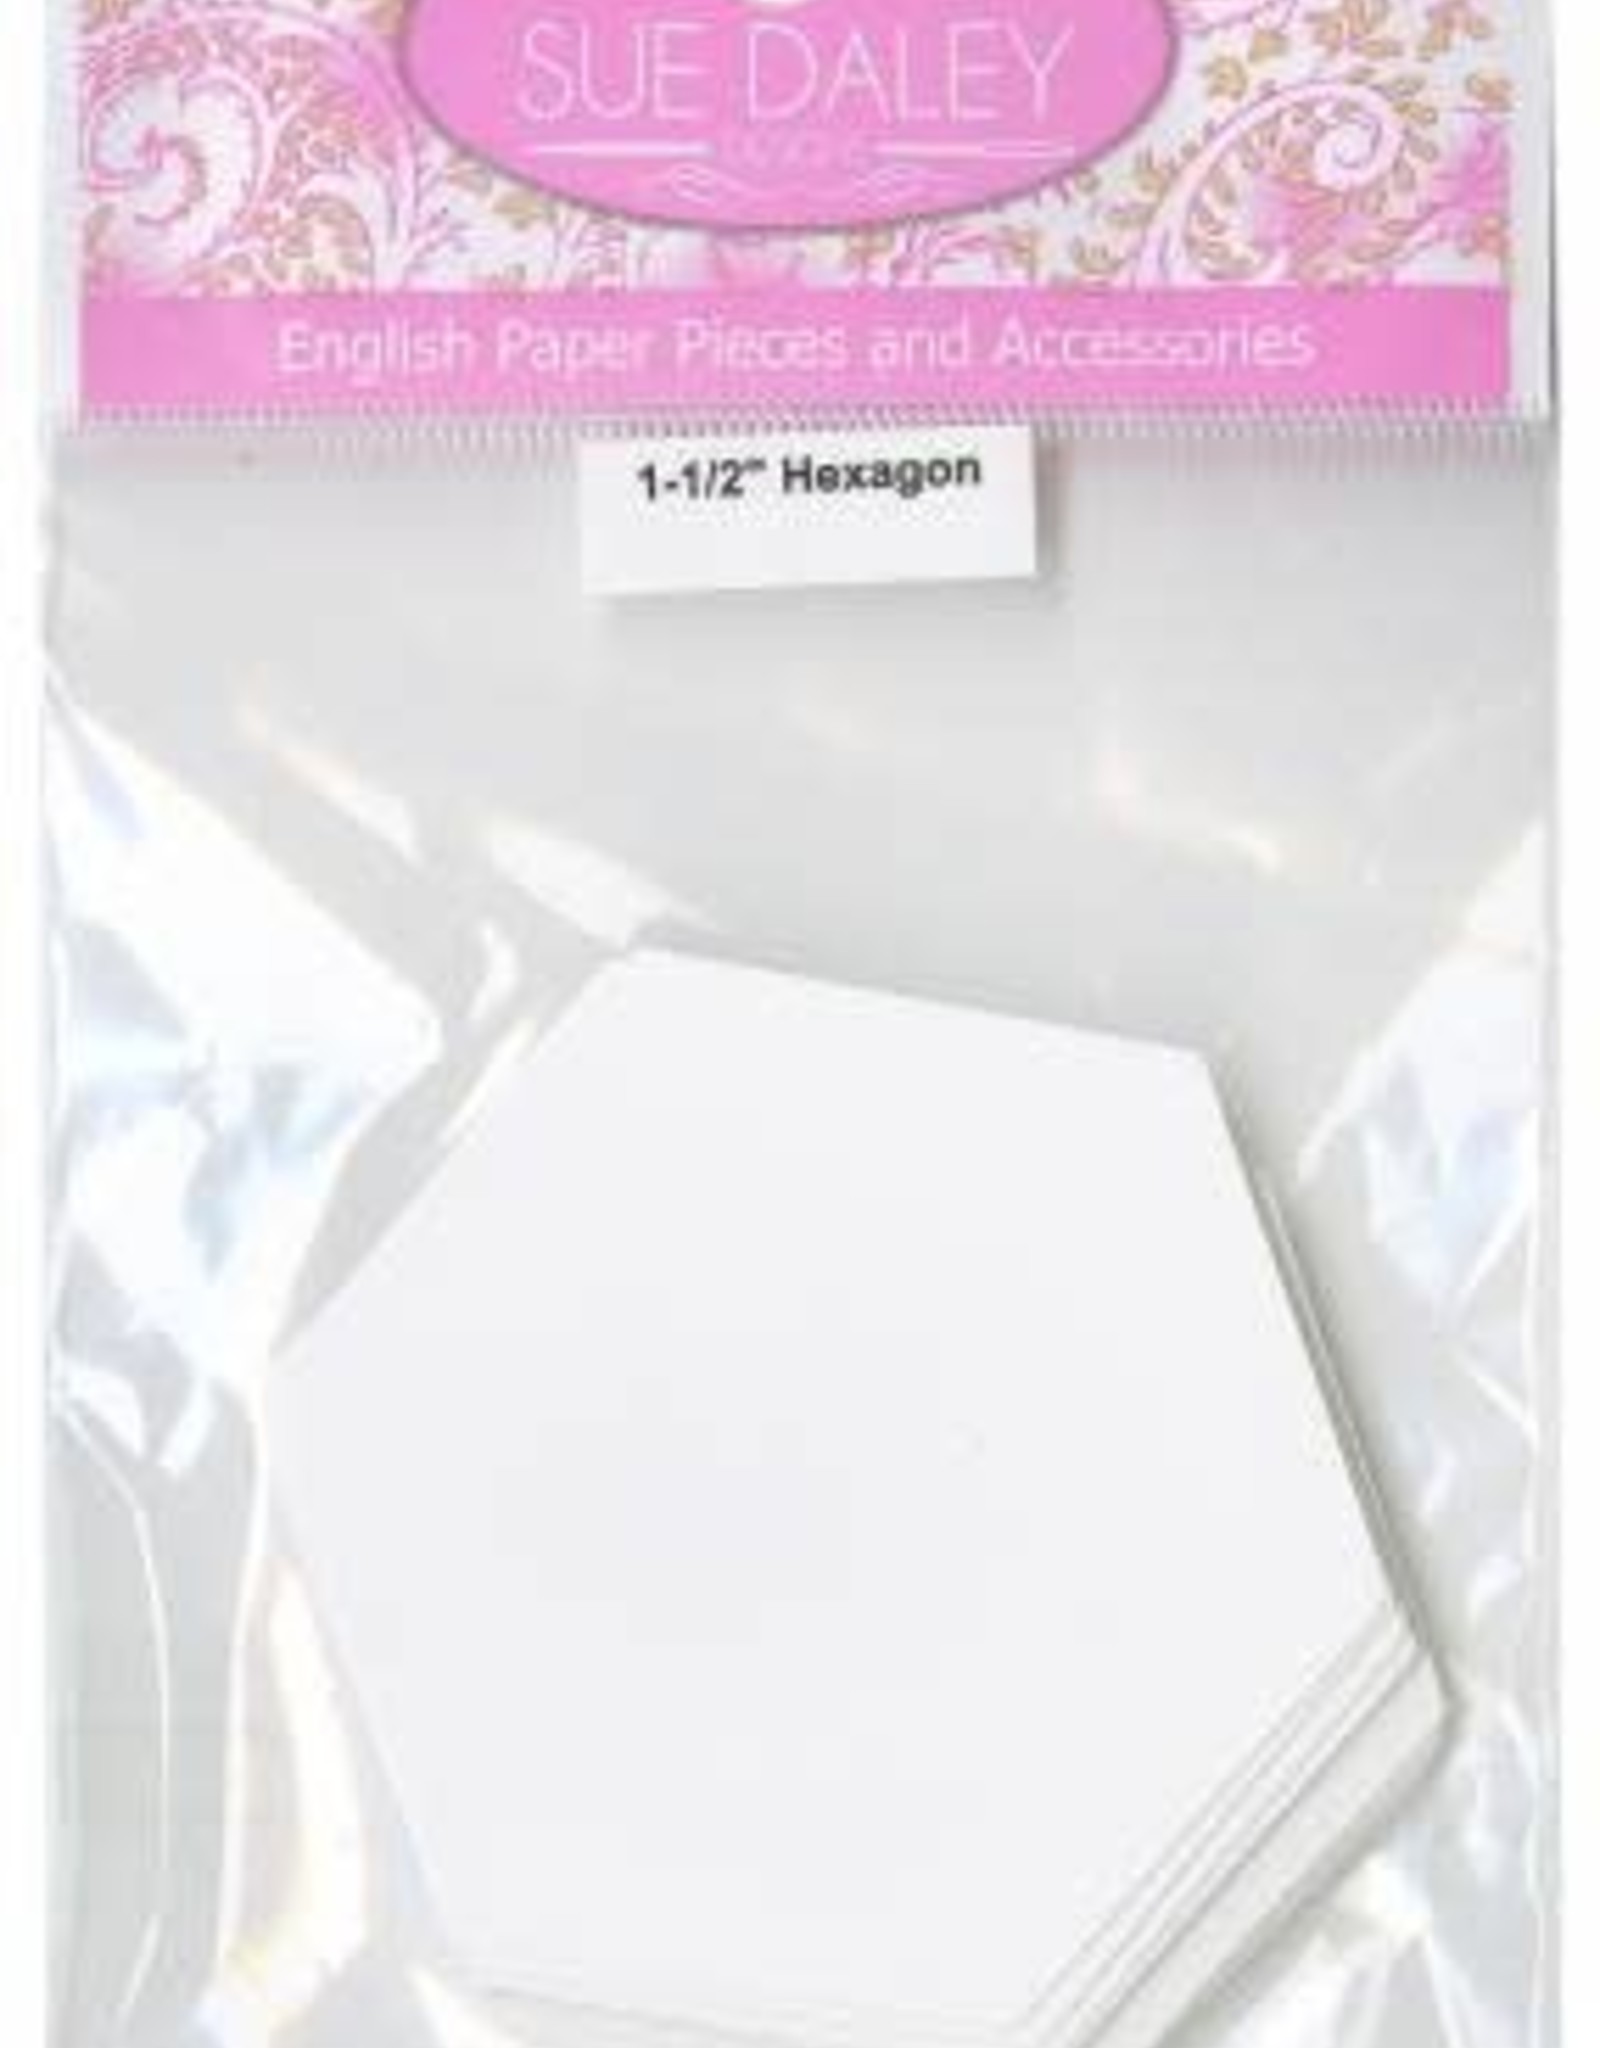 Sue Daley Designs 1 1/2 inch Hexagon Papers (100/bag)